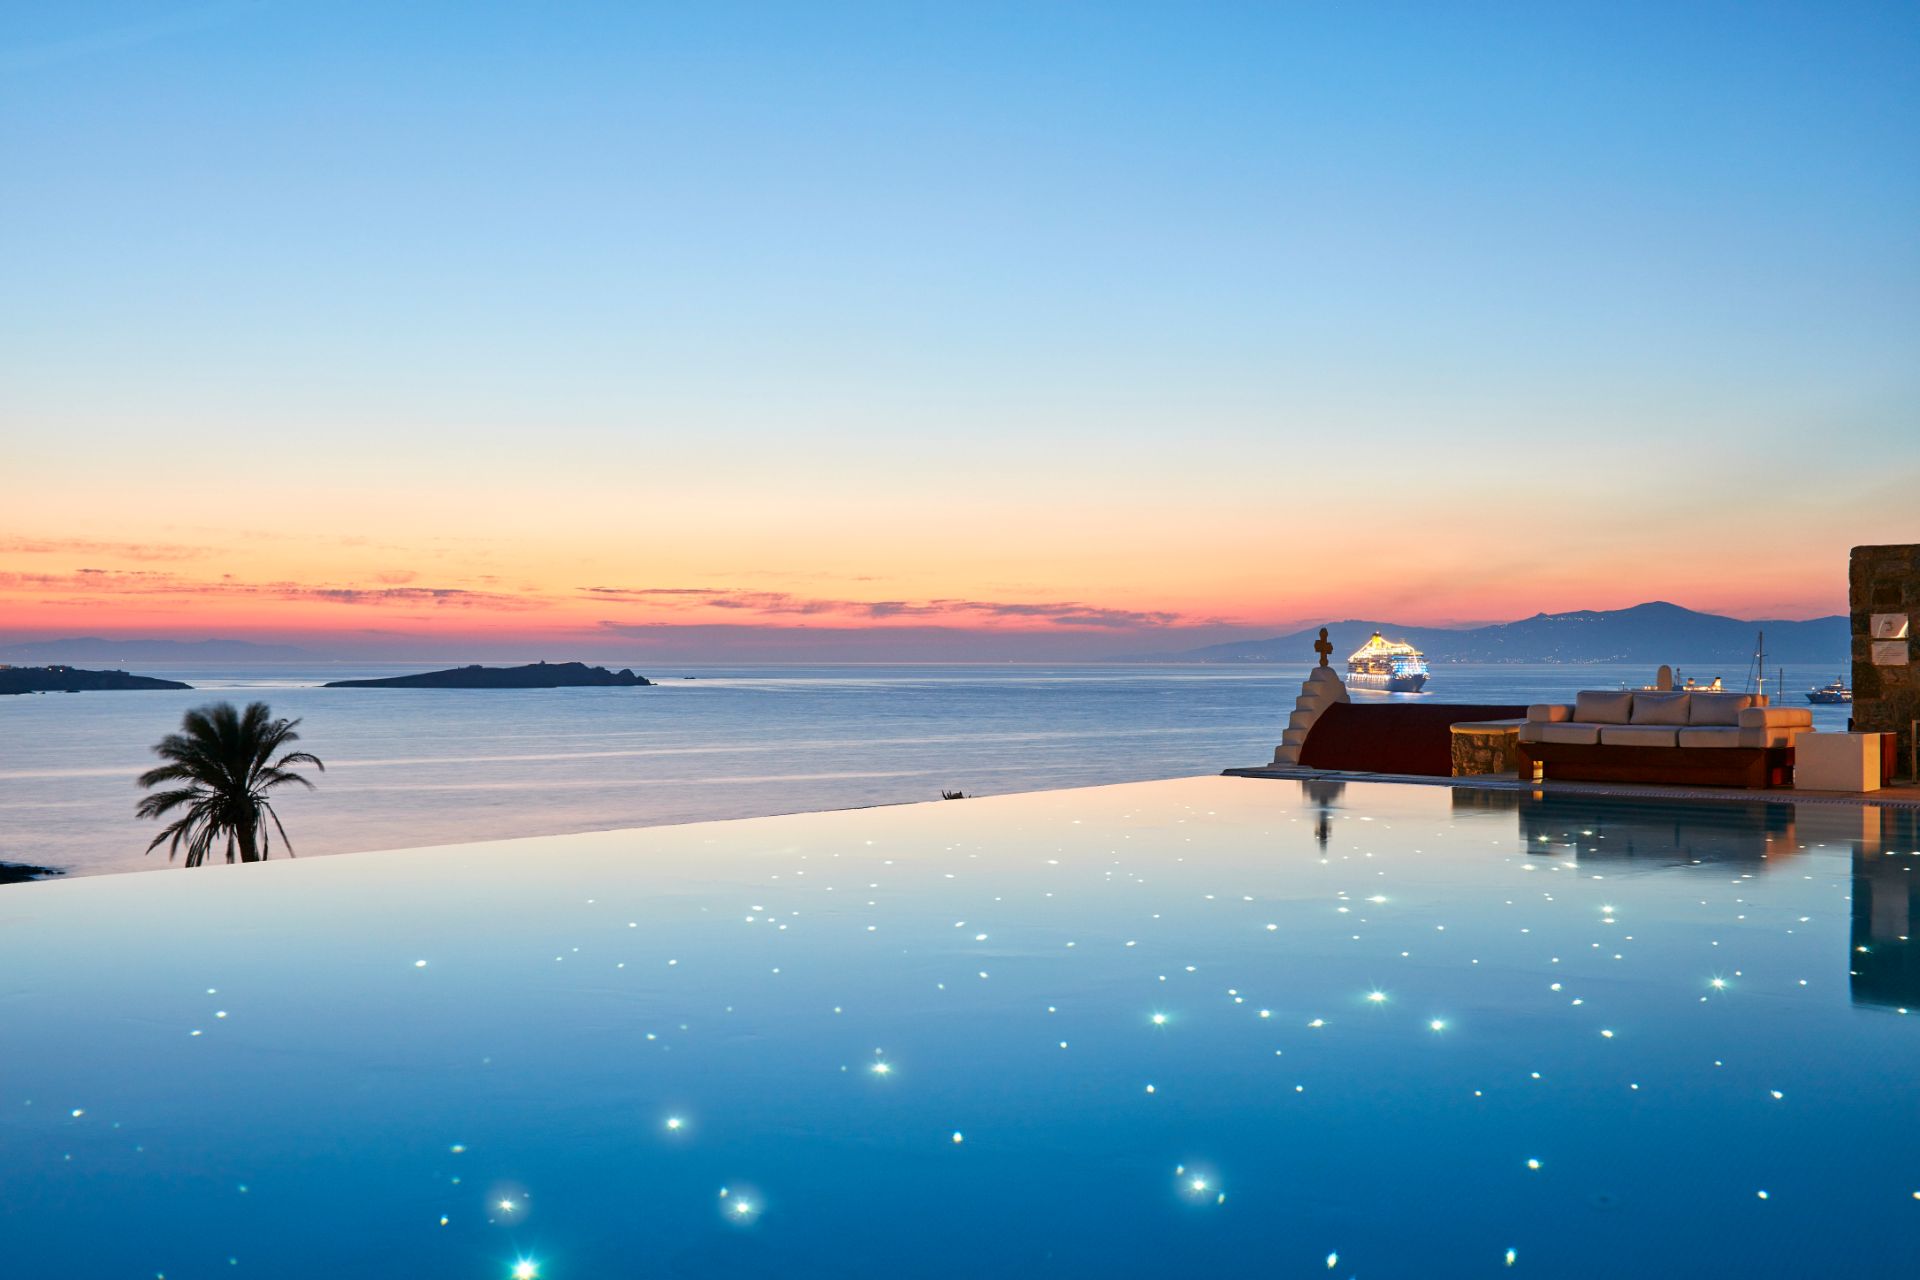 This image shows a beautiful infinity pool with a breathtaking view of the ocean. The pool is surrounded by lush greenery and palm trees, and the water is crystal clear. The sky is blue with a few white clouds, and the sun is setting in the distance. The overall impression is one of tranquility and relaxation.